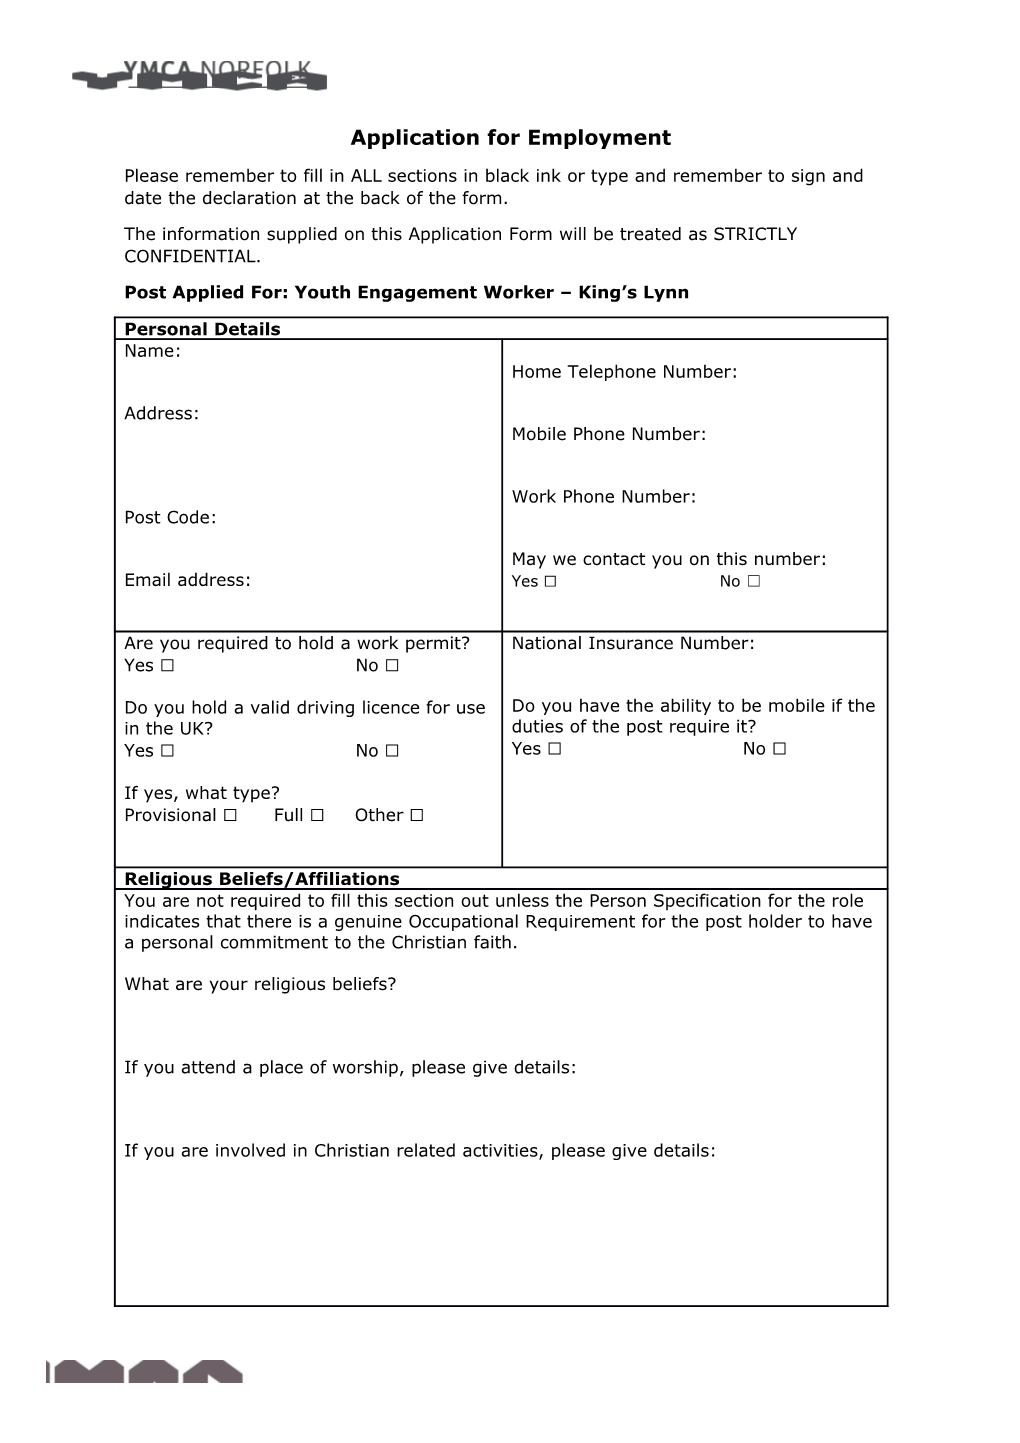 Post Applied For: Youth Engagement Worker King S Lynn